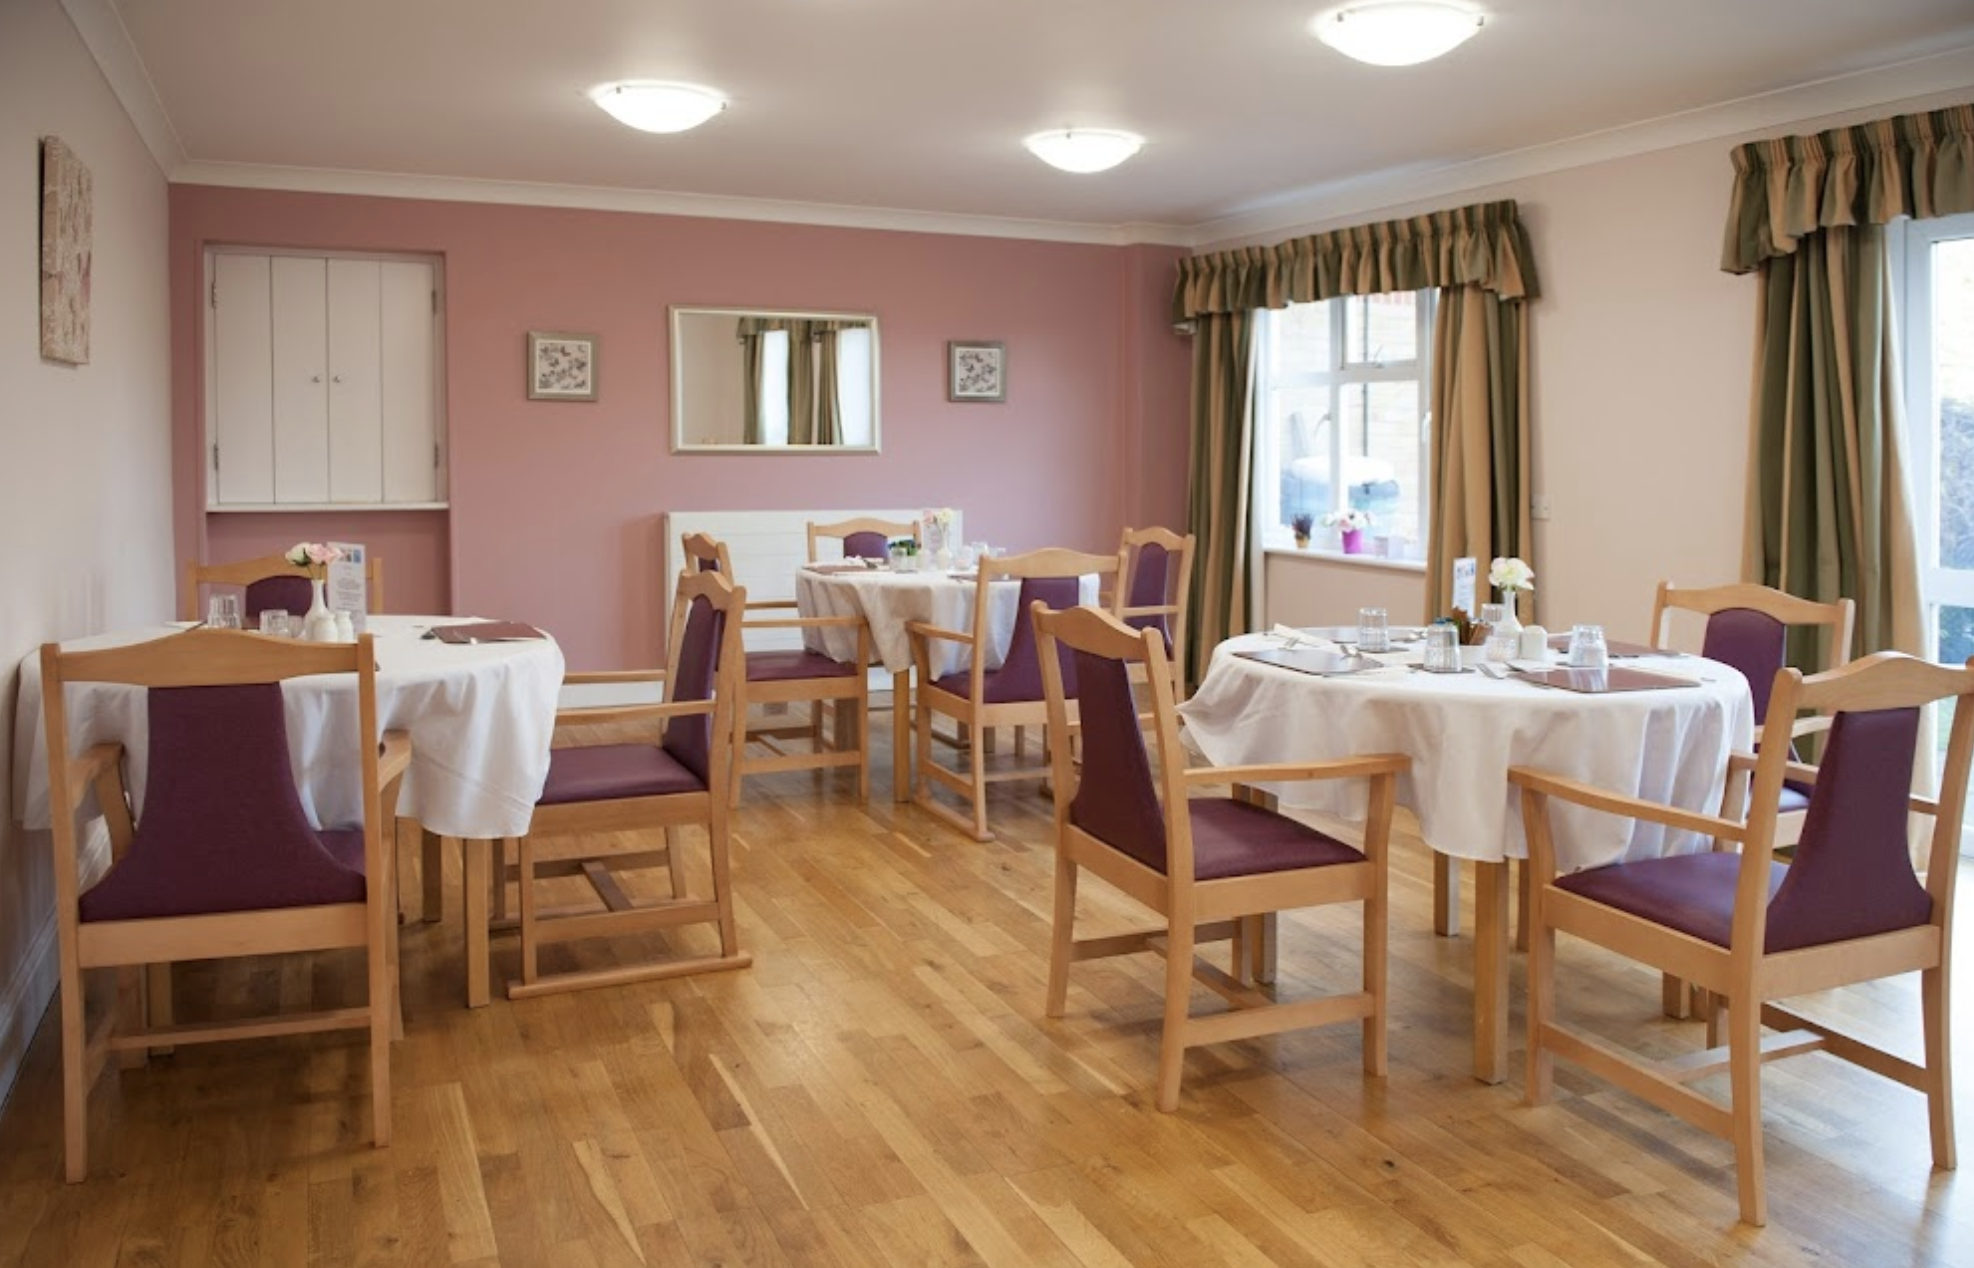 Bupa - St Marks care home 3